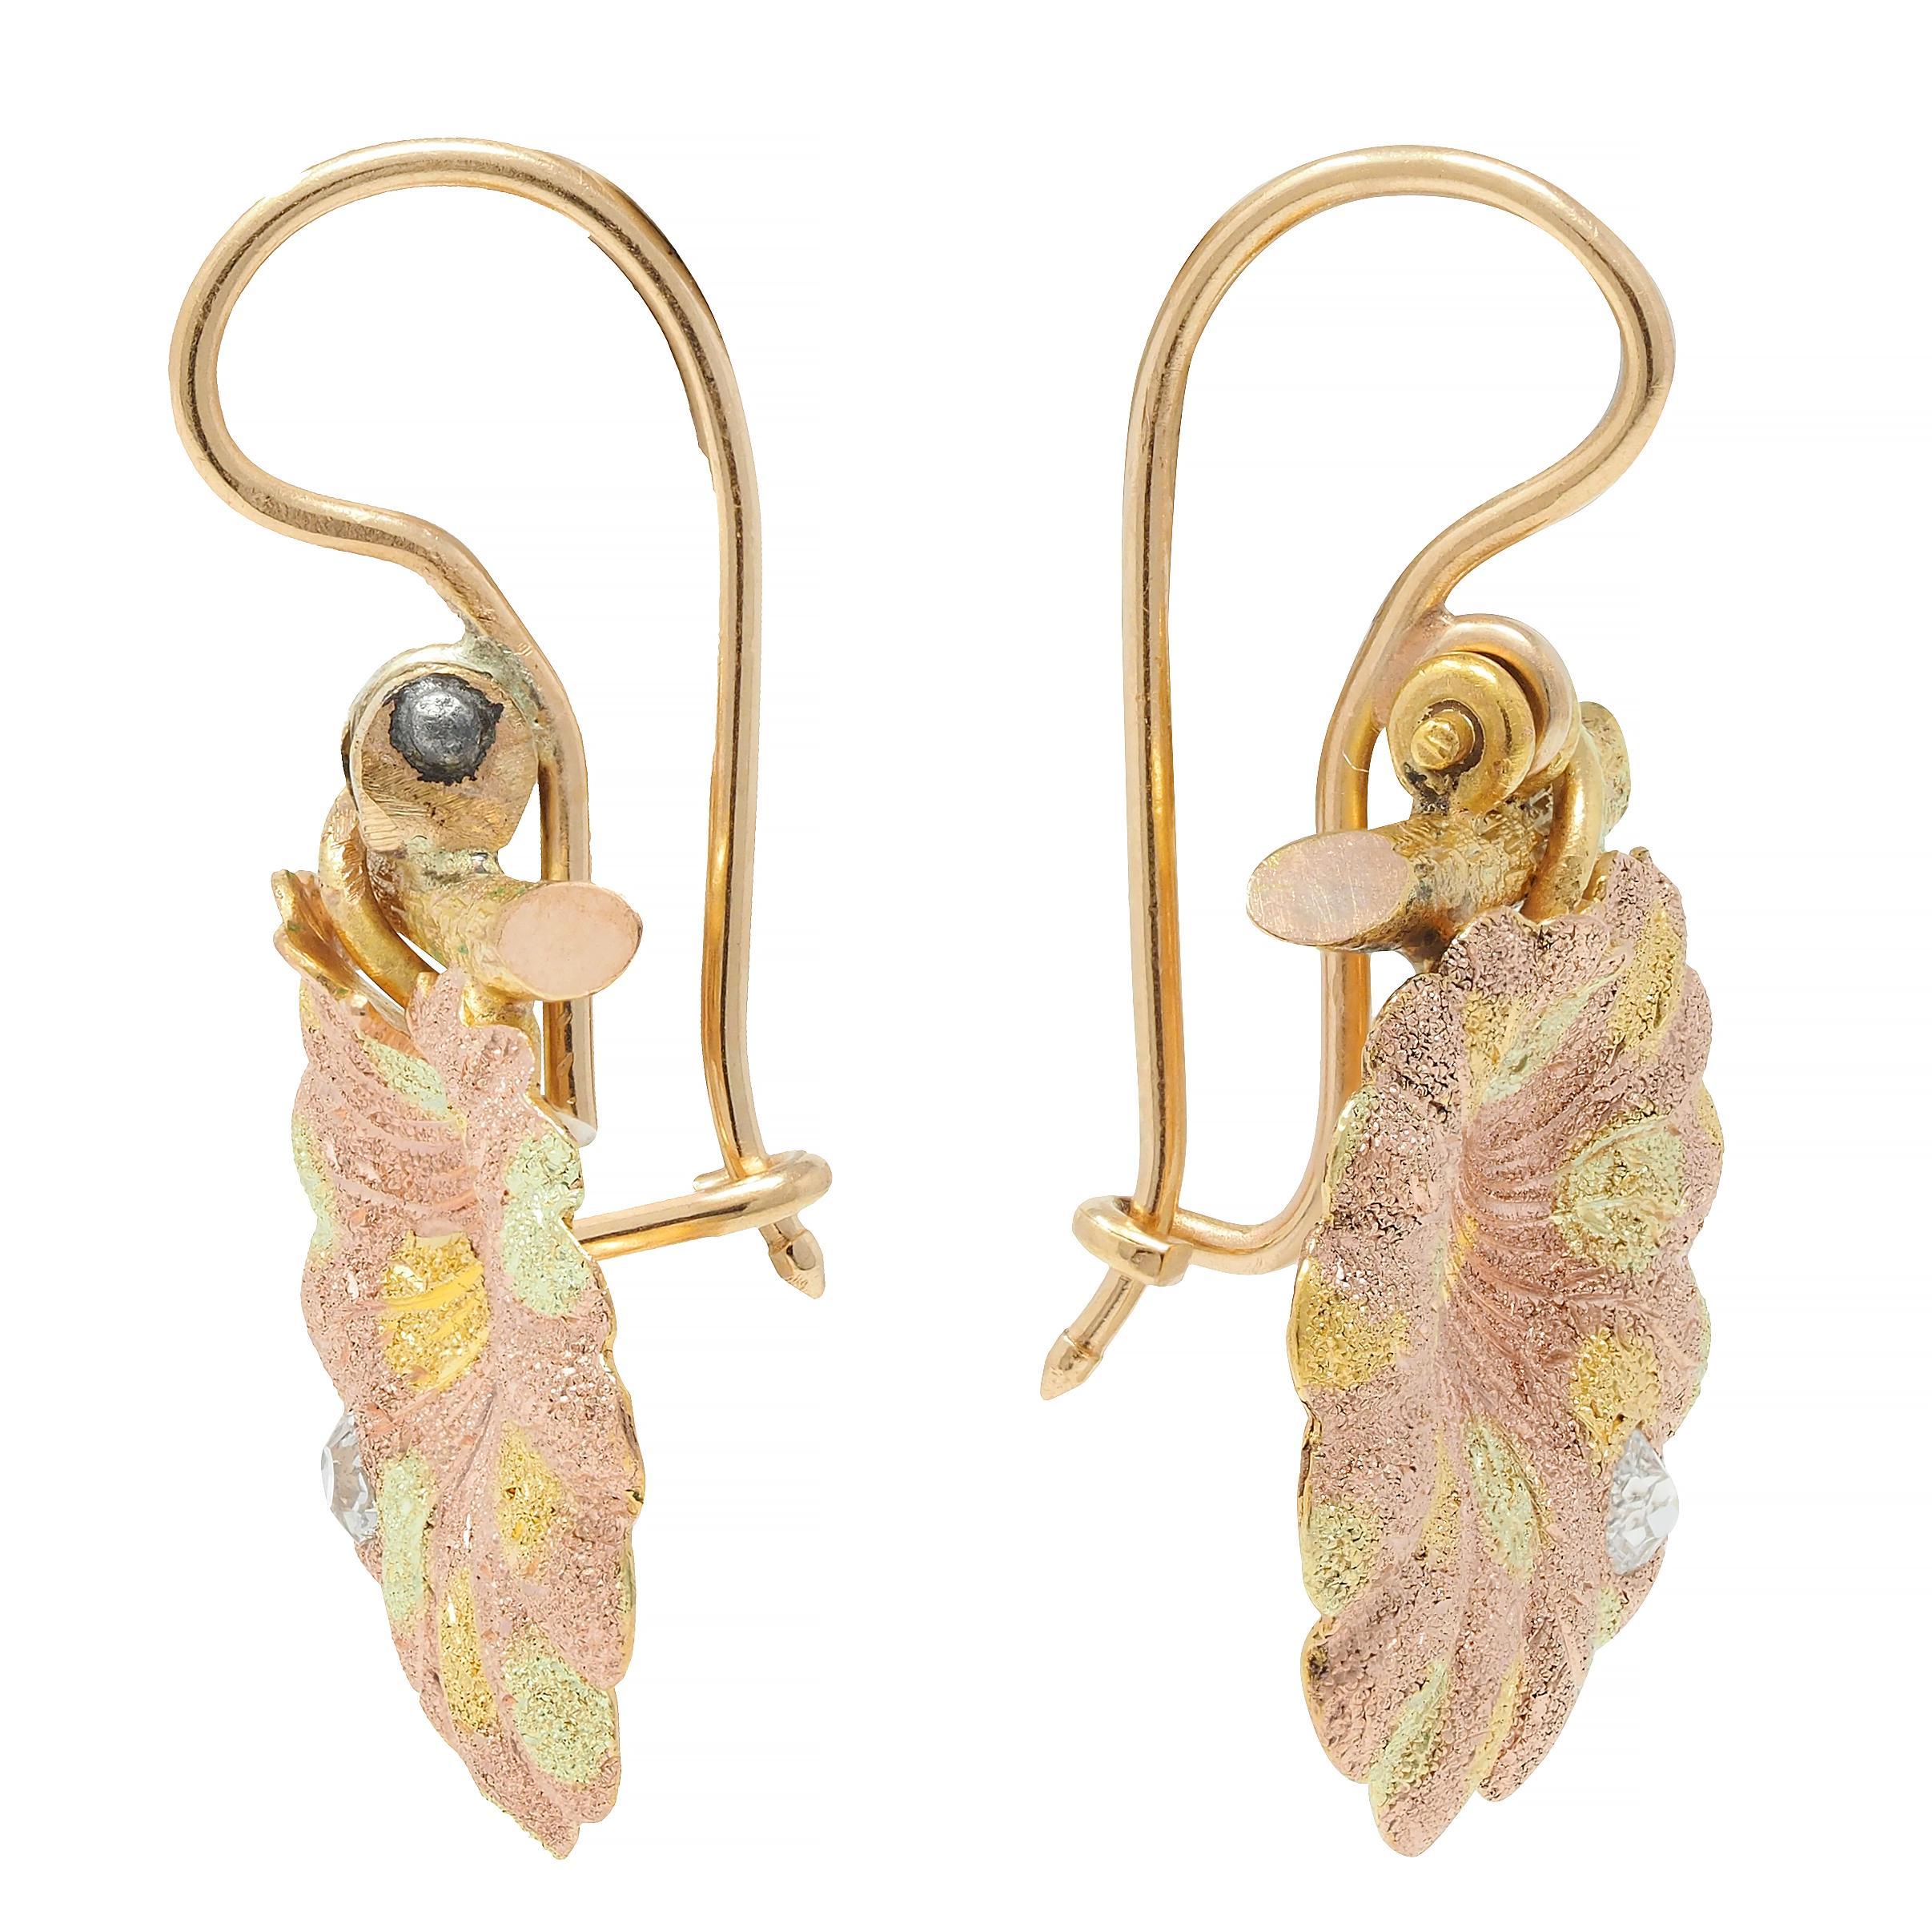 Designed as rose gold geranium leaf drops with dimensional organic form
Accented by yellow and green gold spots - textured throughout
With engraved veining and stem wrapping around branch
Flush set with old mine cut diamonds at bottom
Weighing